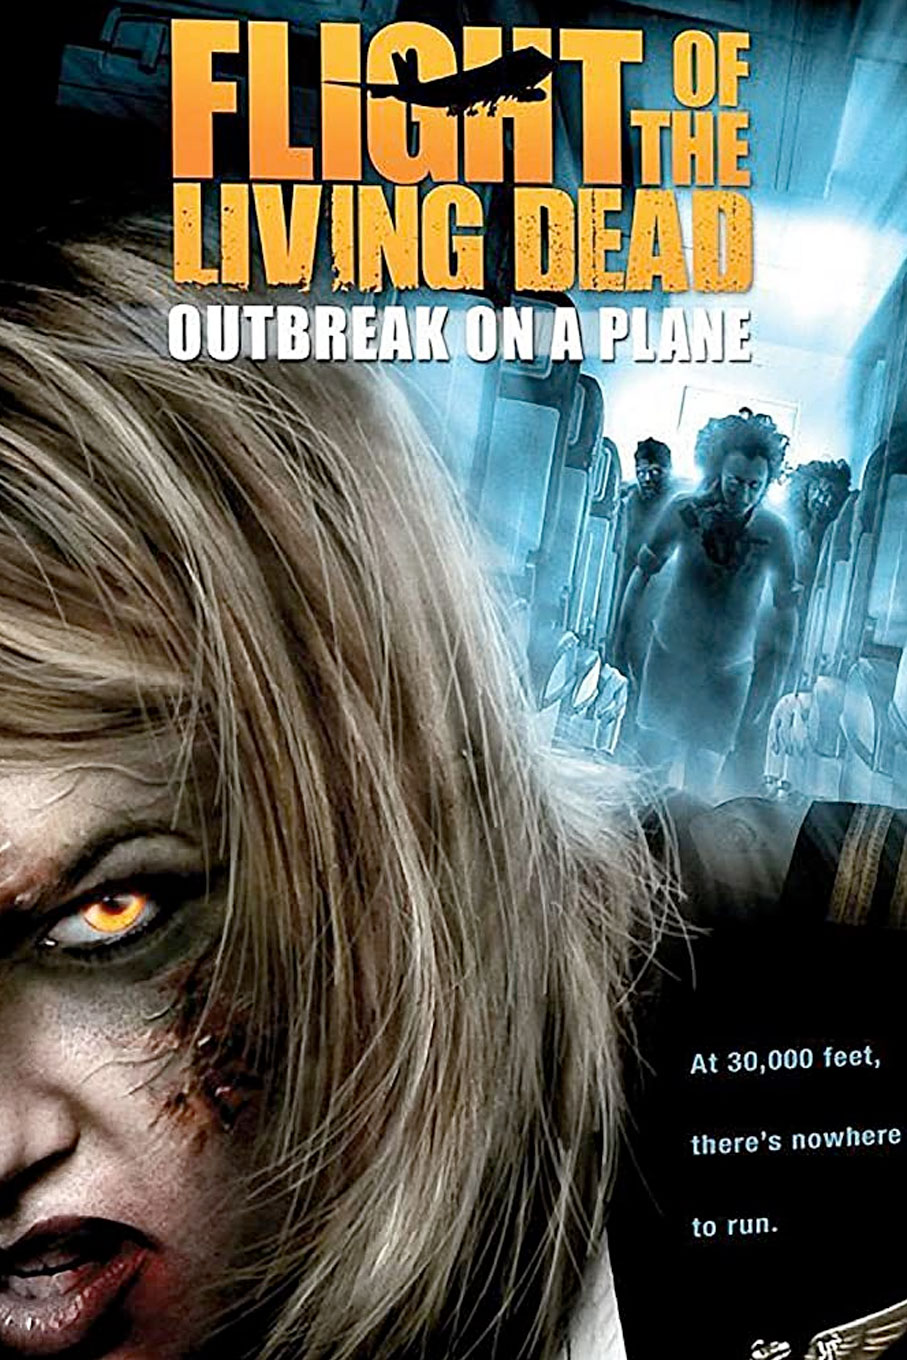 Flight of the living dead : Outbreak on a plane (2007)